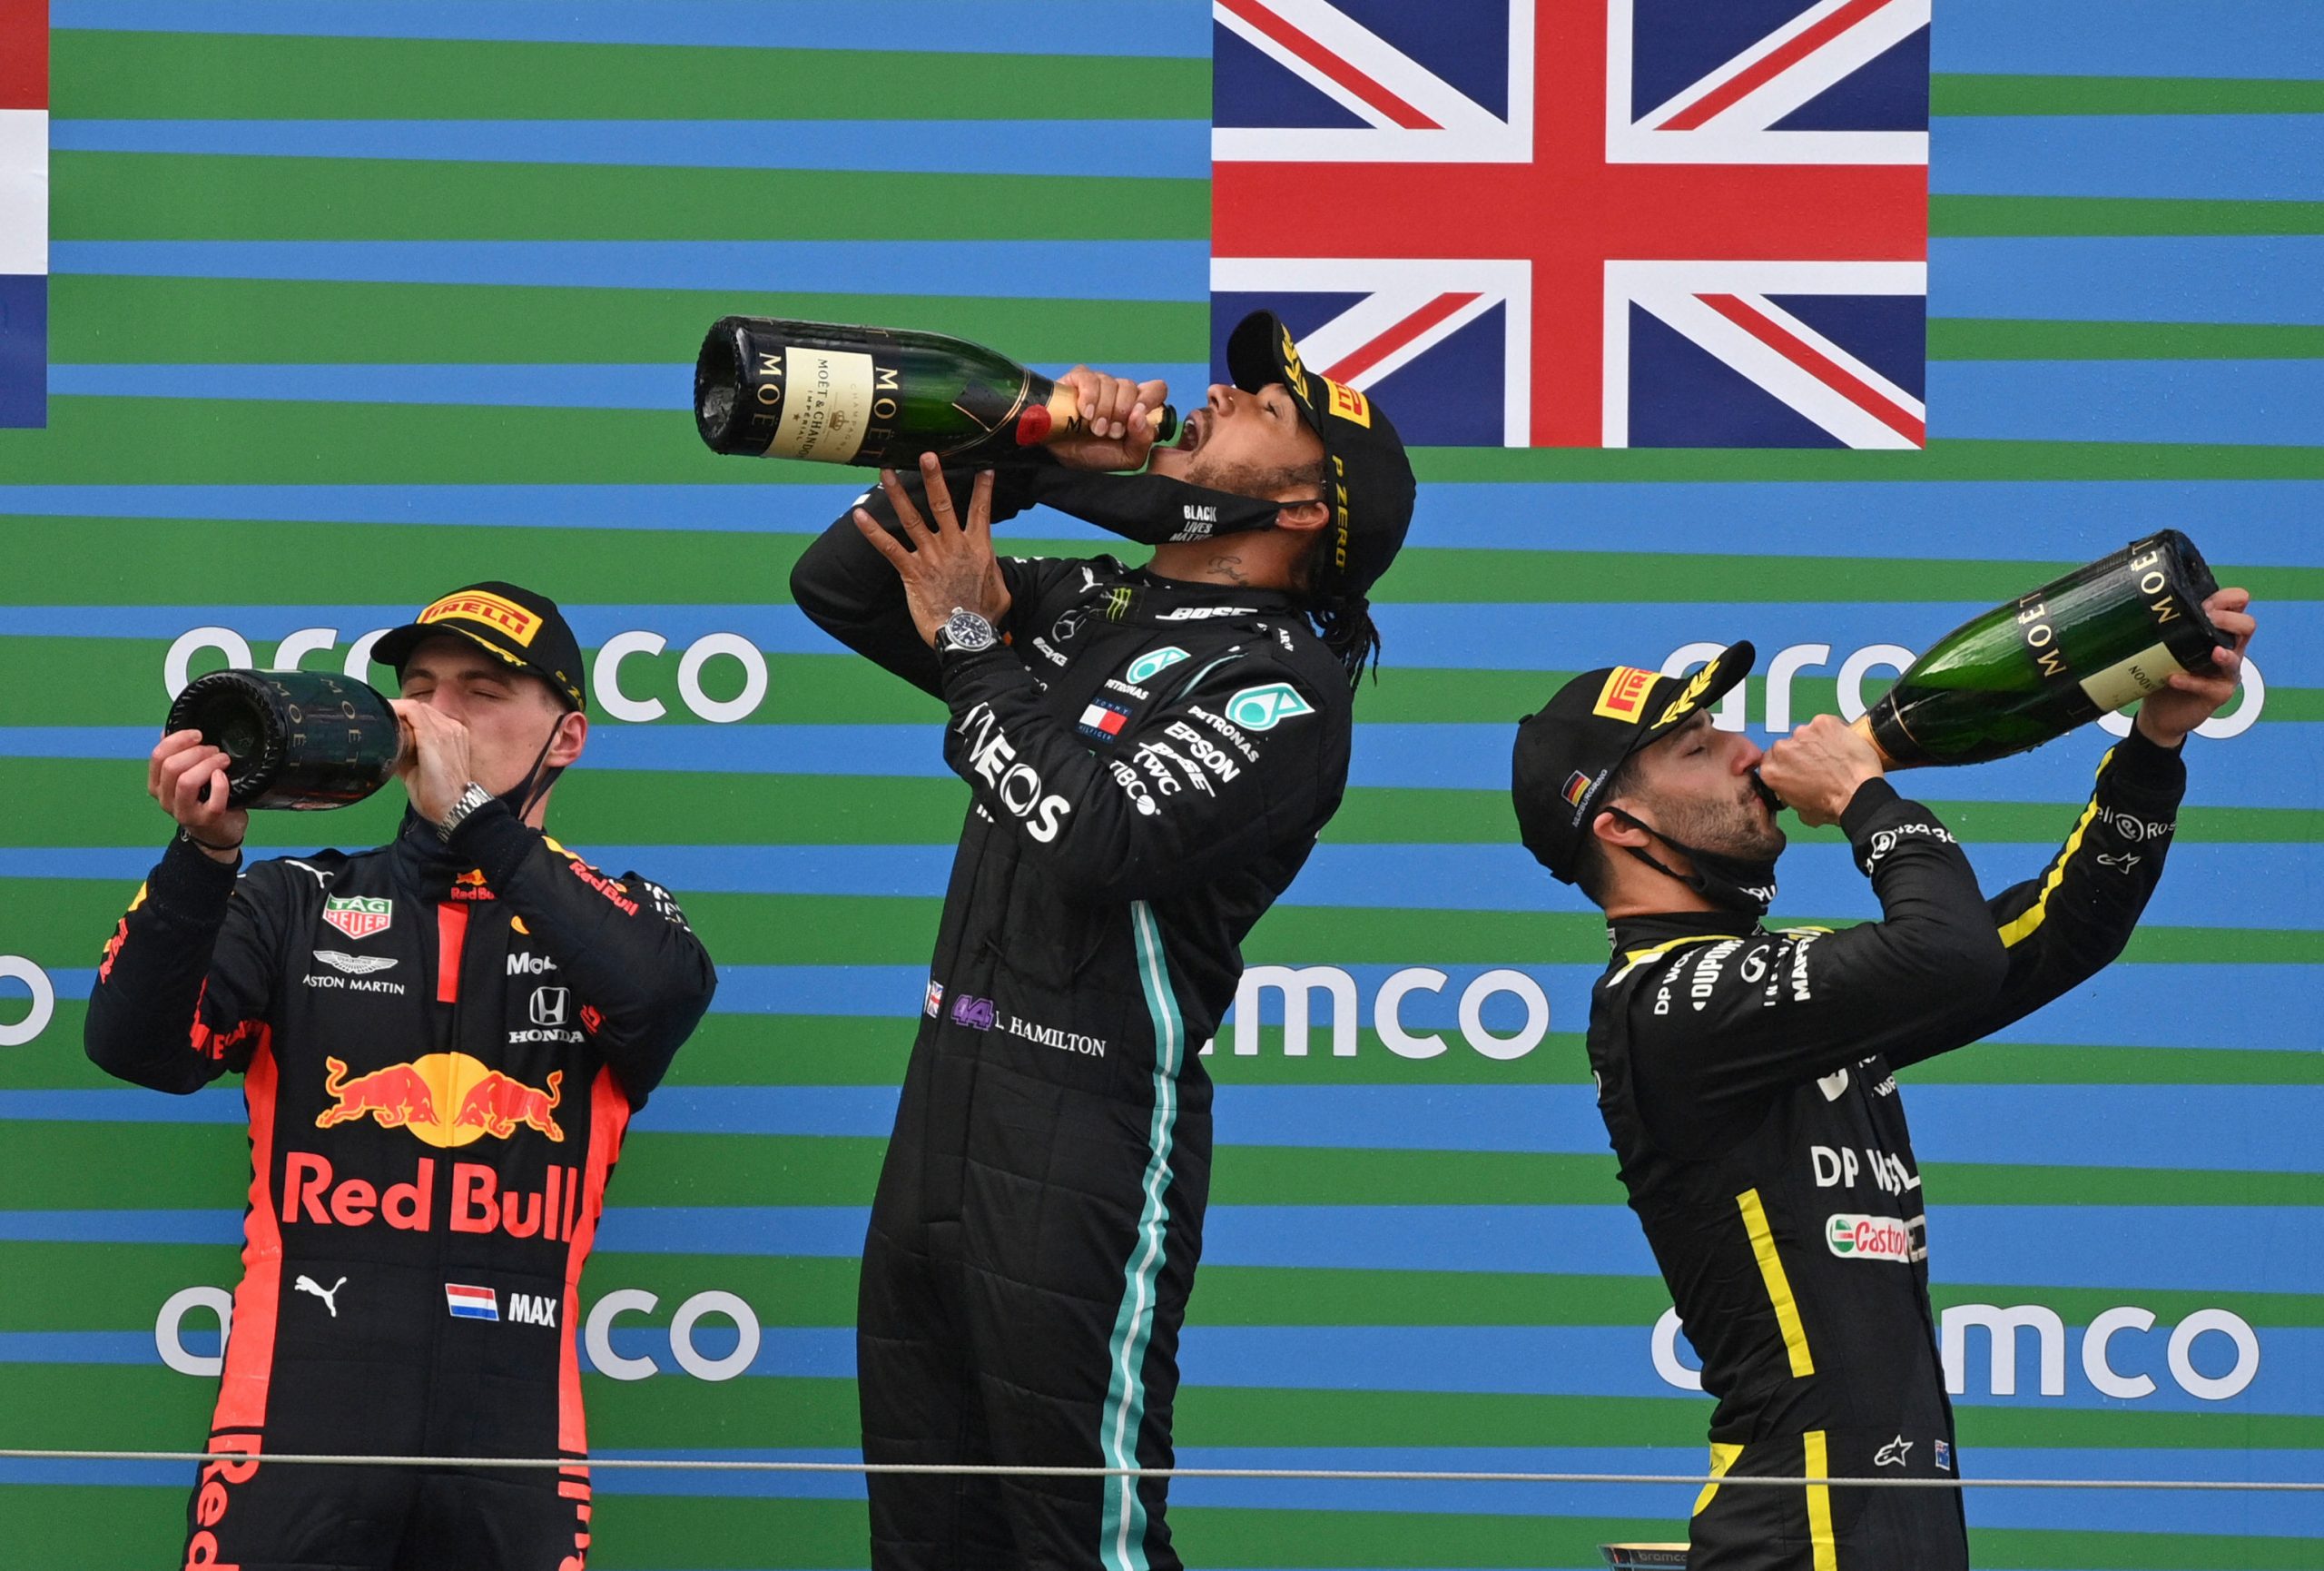 A recap of best Formula One moments after 2020 season end